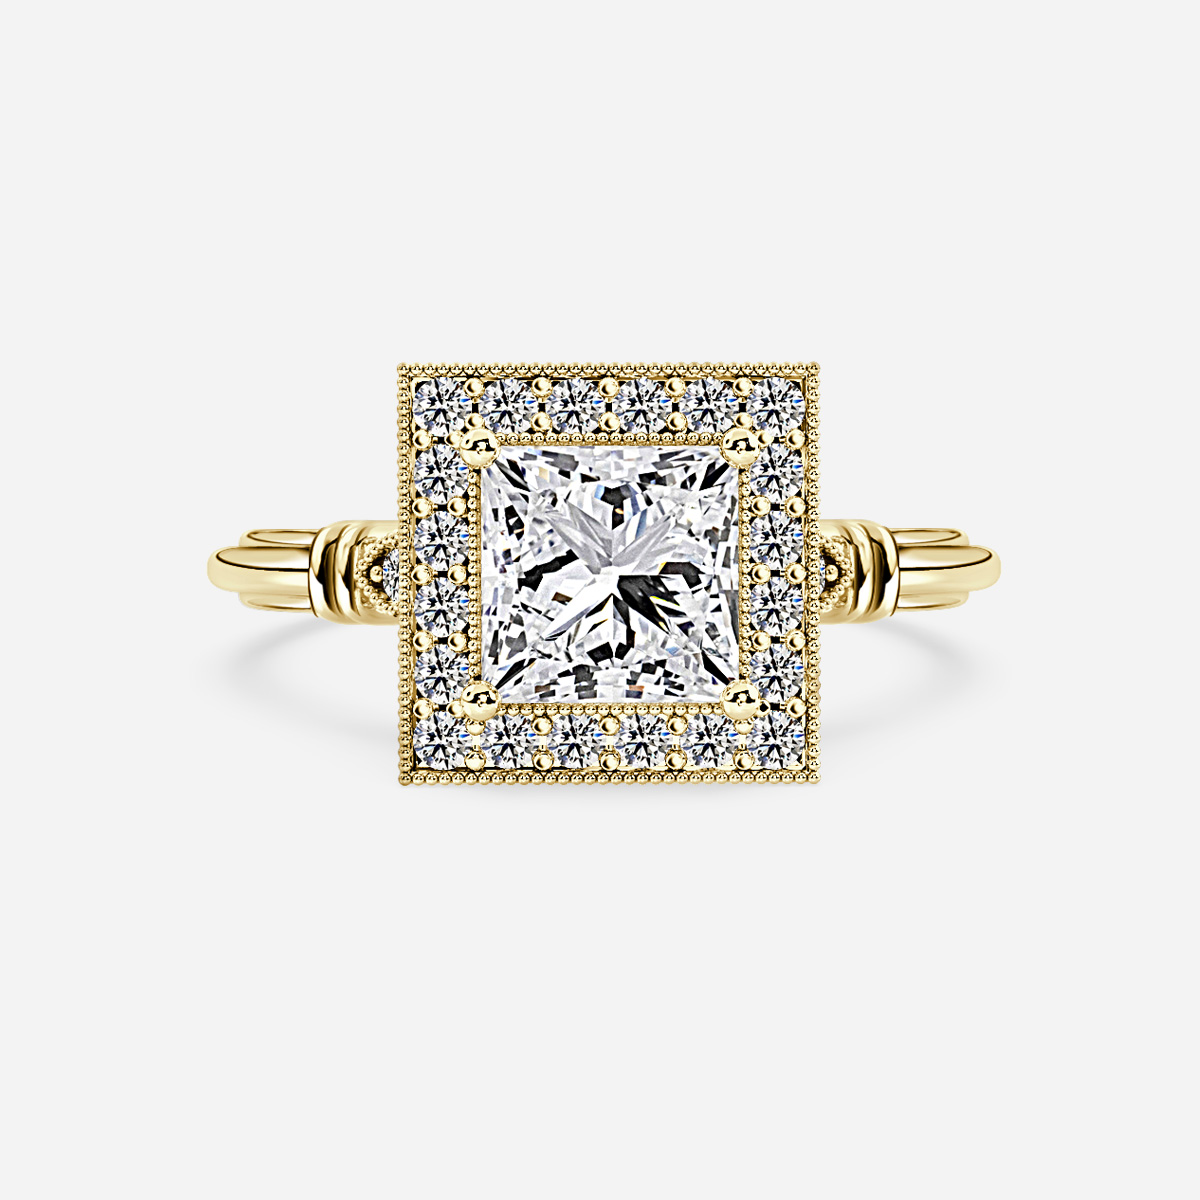 Astaire Yellow Gold Milgrain Vintage Engagement Ring